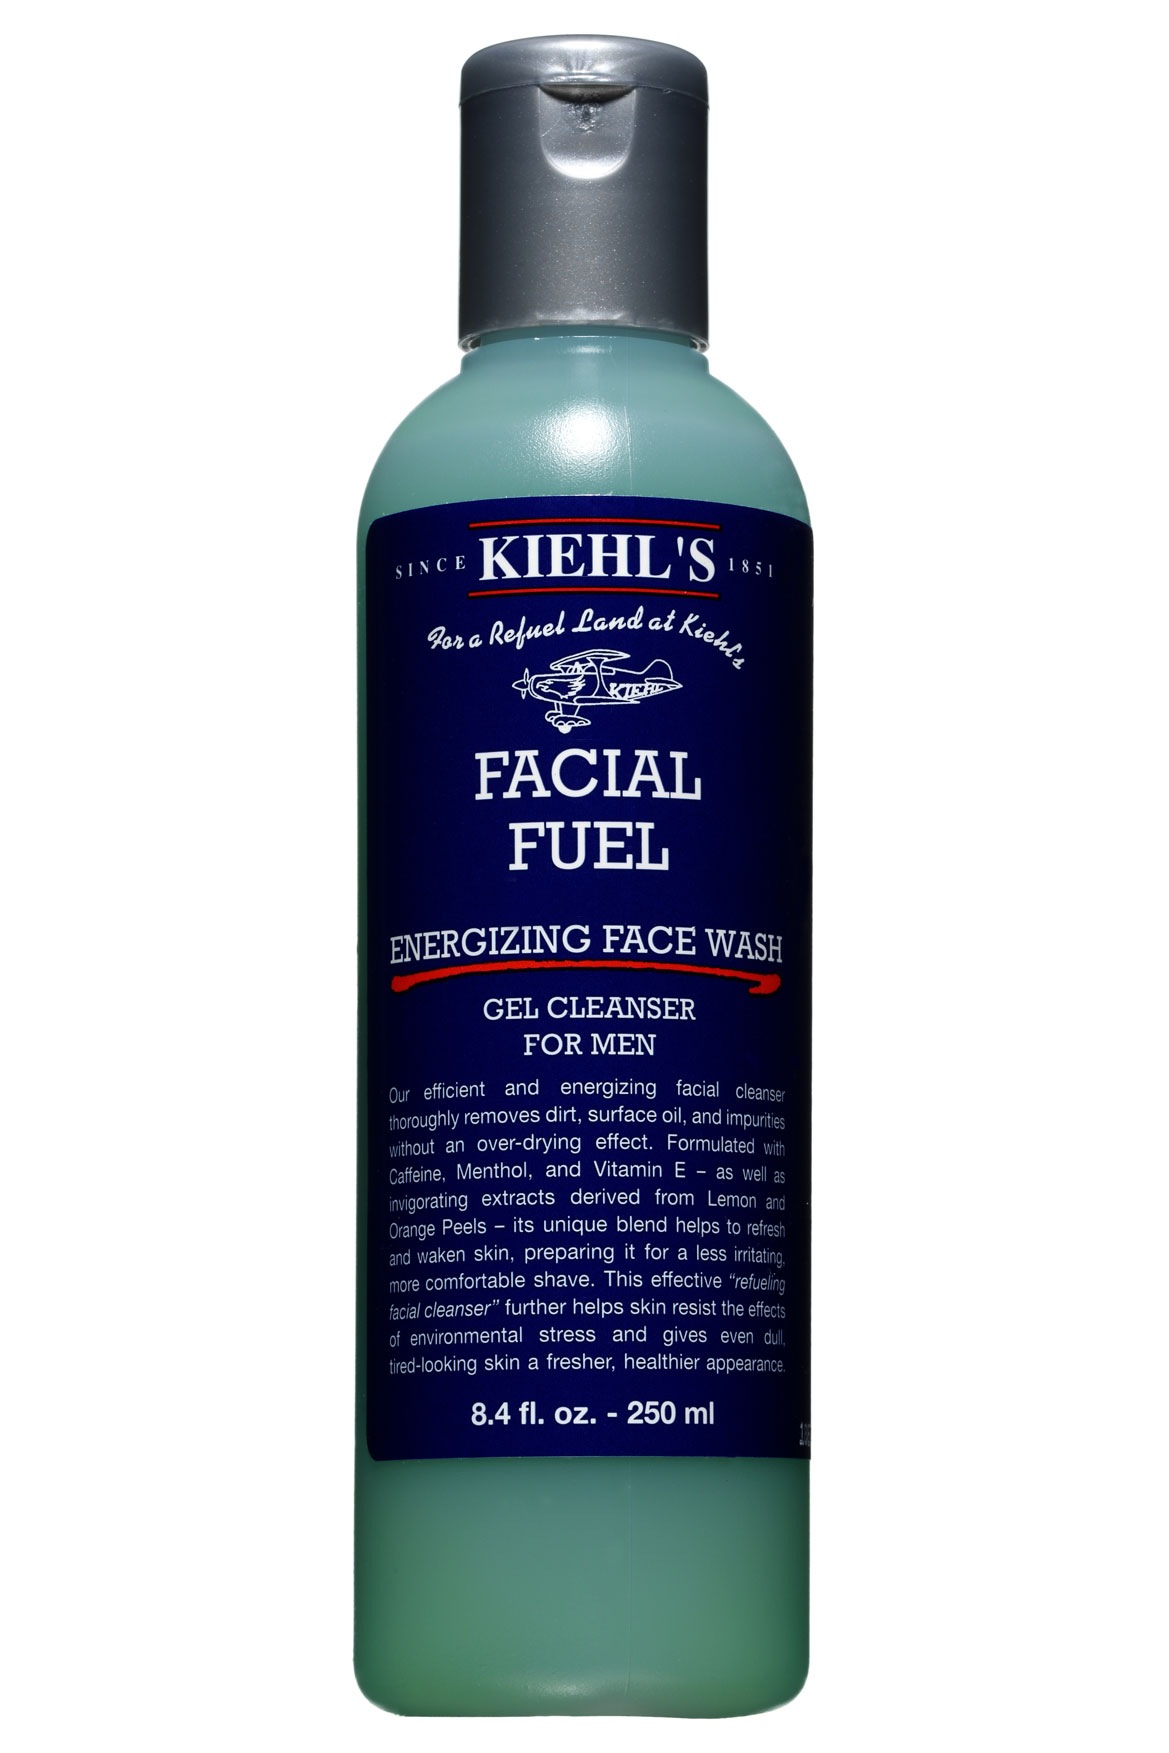 Facial fuel energizing face wash review